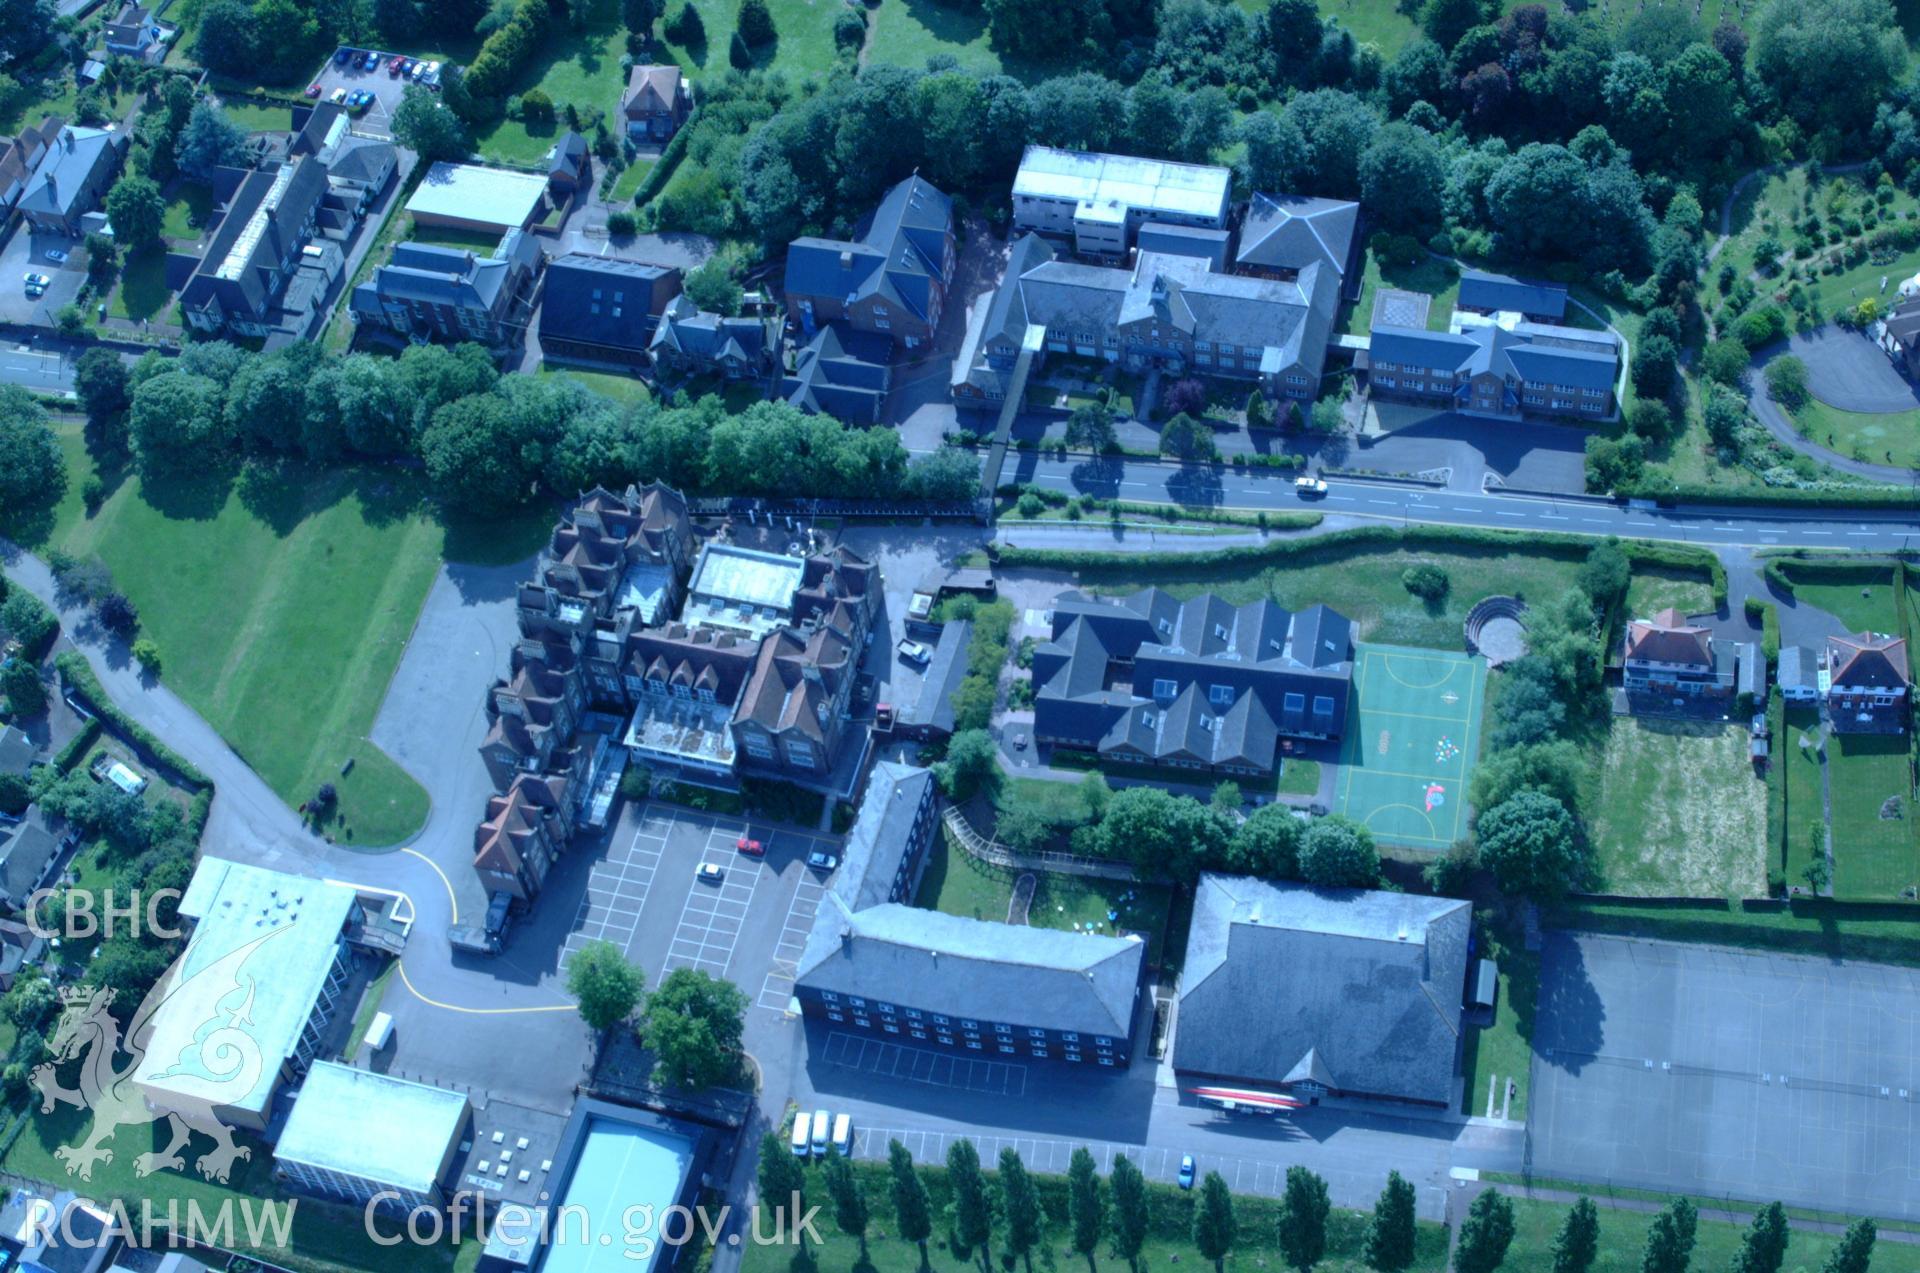 RCAHMW colour oblique aerial photograph of Haberdashers' Monmouth School for Girls, Monmouth taken on 02/06/2004 by Toby Driver